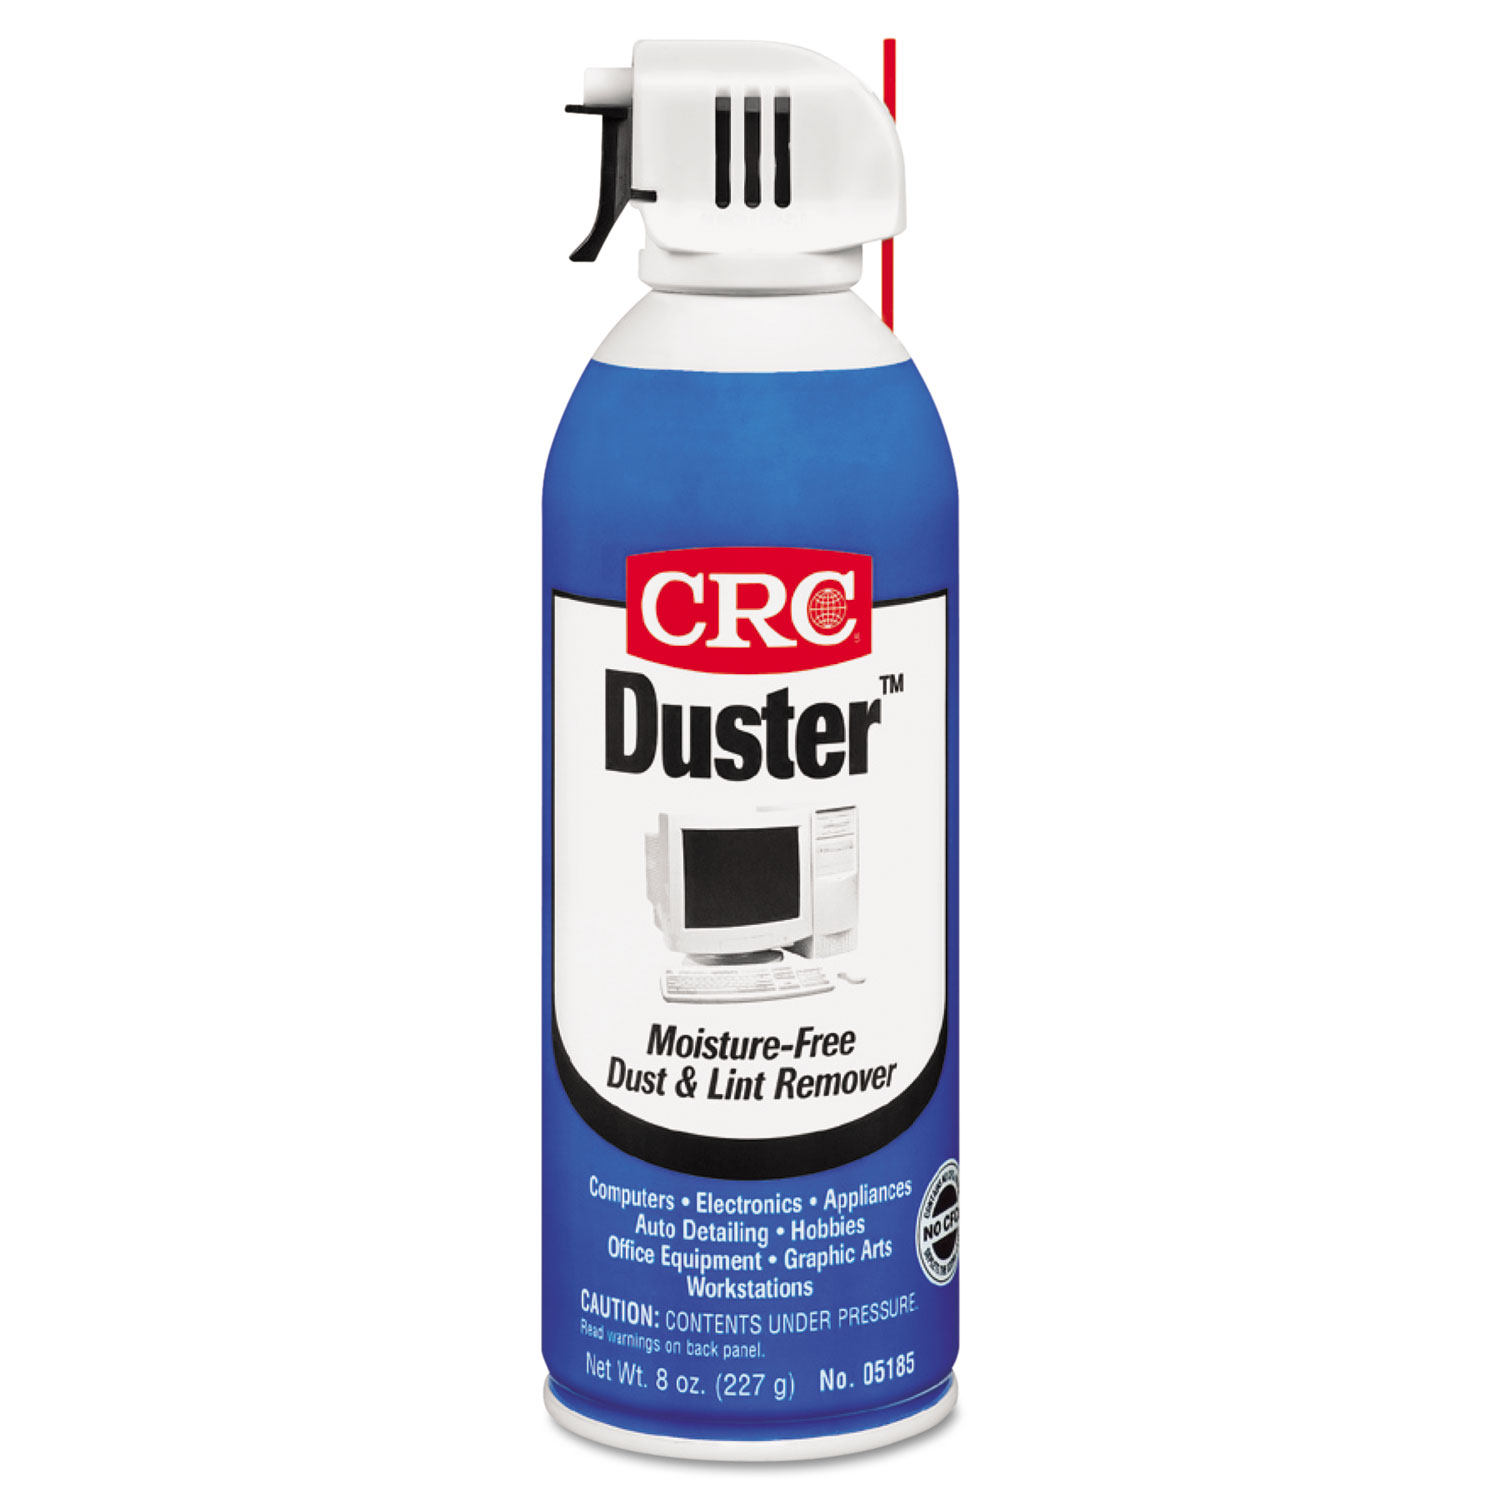 Duster Moisture-Free Dust and Lint Remover, 16oz